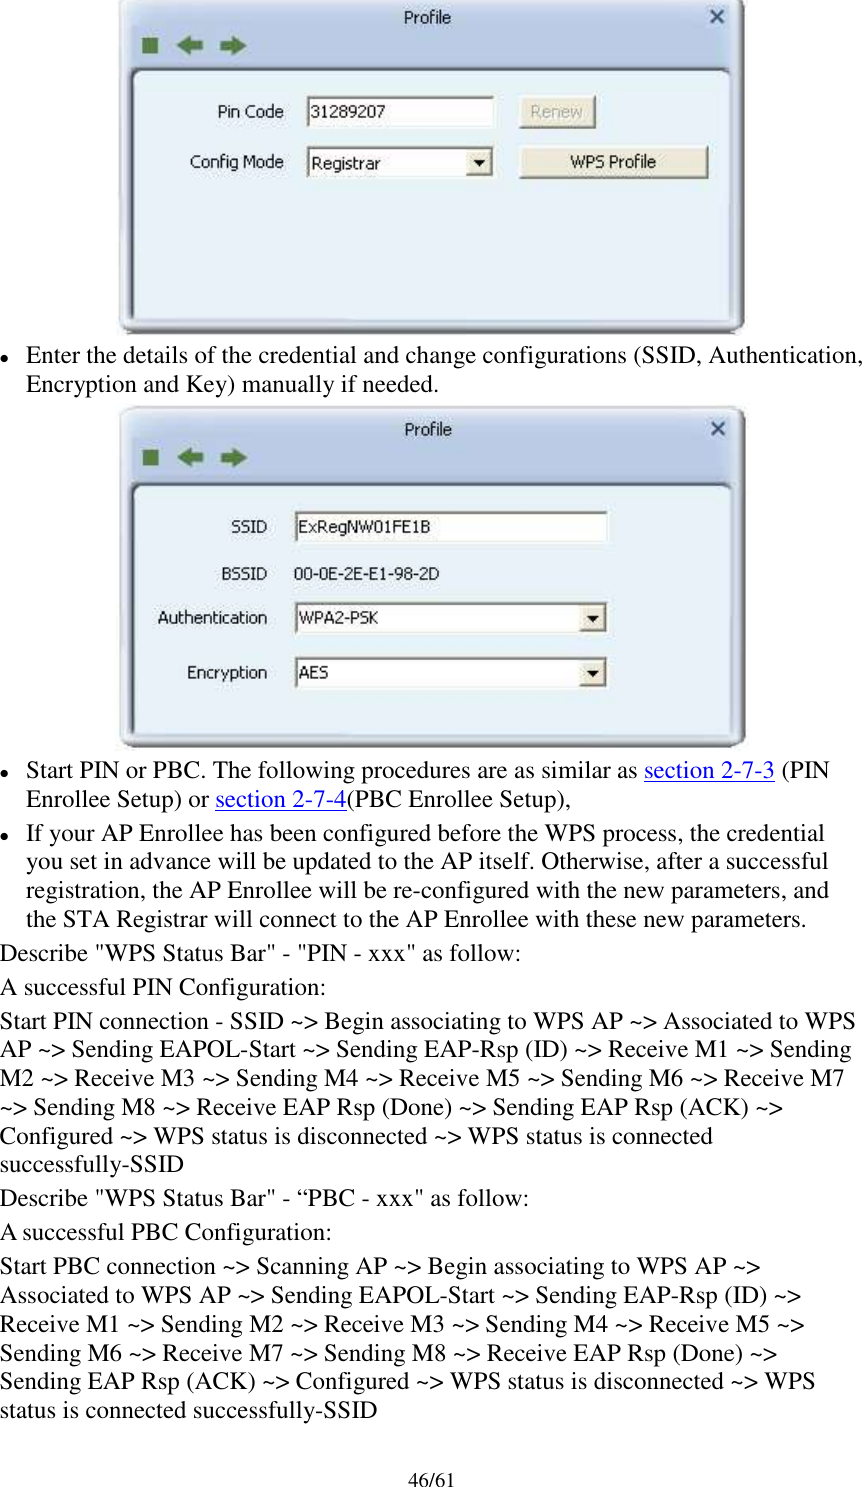 46/61Enter the details of the credential and change configurations (SSID, Authentication,Encryption and Key) manually if needed.Start PIN or PBC. The following procedures are as similar as section 2-7-3 (PINEnrollee Setup) or section 2-7-4(PBC Enrollee Setup),If your AP Enrollee has been configured before the WPS process, the credentialyou set in advance will be updated to the AP itself. Otherwise, after a successfulregistration, the AP Enrollee will be re-configured with the new parameters, andthe STA Registrar will connect to the AP Enrollee with these new parameters.Describe &quot;WPS Status Bar&quot; - &quot;PIN - xxx&quot; as follow:A successful PIN Configuration:Start PIN connection - SSID ~&gt; Begin associating to WPS AP ~&gt; Associated to WPSAP ~&gt; Sending EAPOL-Start ~&gt; Sending EAP-Rsp (ID) ~&gt; Receive M1 ~&gt; SendingM2 ~&gt; Receive M3 ~&gt; Sending M4 ~&gt; Receive M5 ~&gt; Sending M6 ~&gt; Receive M7~&gt; Sending M8 ~&gt; Receive EAP Rsp (Done) ~&gt; Sending EAP Rsp (ACK) ~&gt;Configured ~&gt; WPS status is disconnected ~&gt; WPS status is connectedsuccessfully-SSIDDescribe &quot;WPS Status Bar&quot; - “PBC - xxx&quot; as follow:A successful PBC Configuration:Start PBC connection ~&gt; Scanning AP ~&gt; Begin associating to WPS AP ~&gt;Associated to WPS AP ~&gt; Sending EAPOL-Start ~&gt; Sending EAP-Rsp (ID) ~&gt;Receive M1 ~&gt; Sending M2 ~&gt; Receive M3 ~&gt; Sending M4 ~&gt; Receive M5 ~&gt;Sending M6 ~&gt; Receive M7 ~&gt; Sending M8 ~&gt; Receive EAP Rsp (Done) ~&gt;Sending EAP Rsp (ACK) ~&gt; Configured ~&gt; WPS status is disconnected ~&gt; WPSstatus is connected successfully-SSID